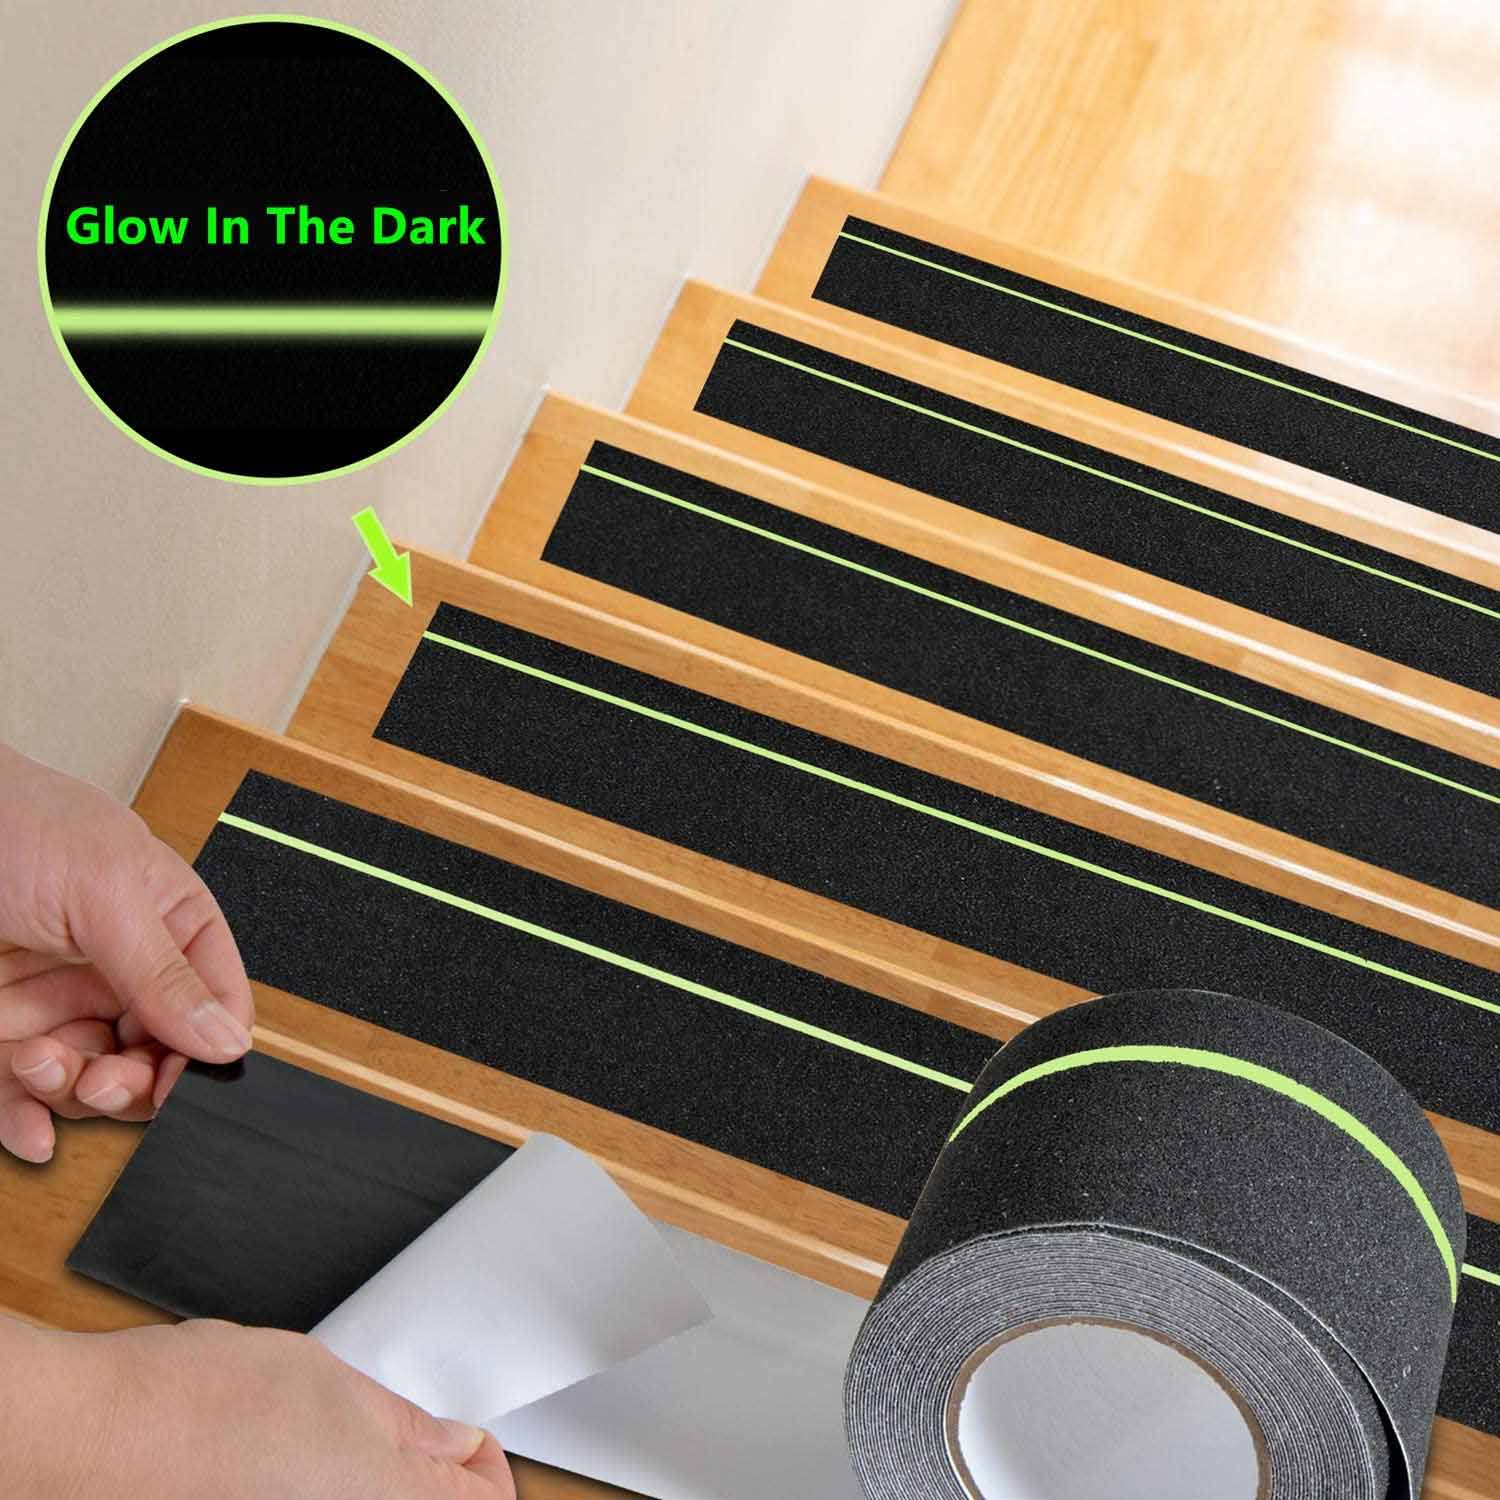 Glow in the dark tape for stairs